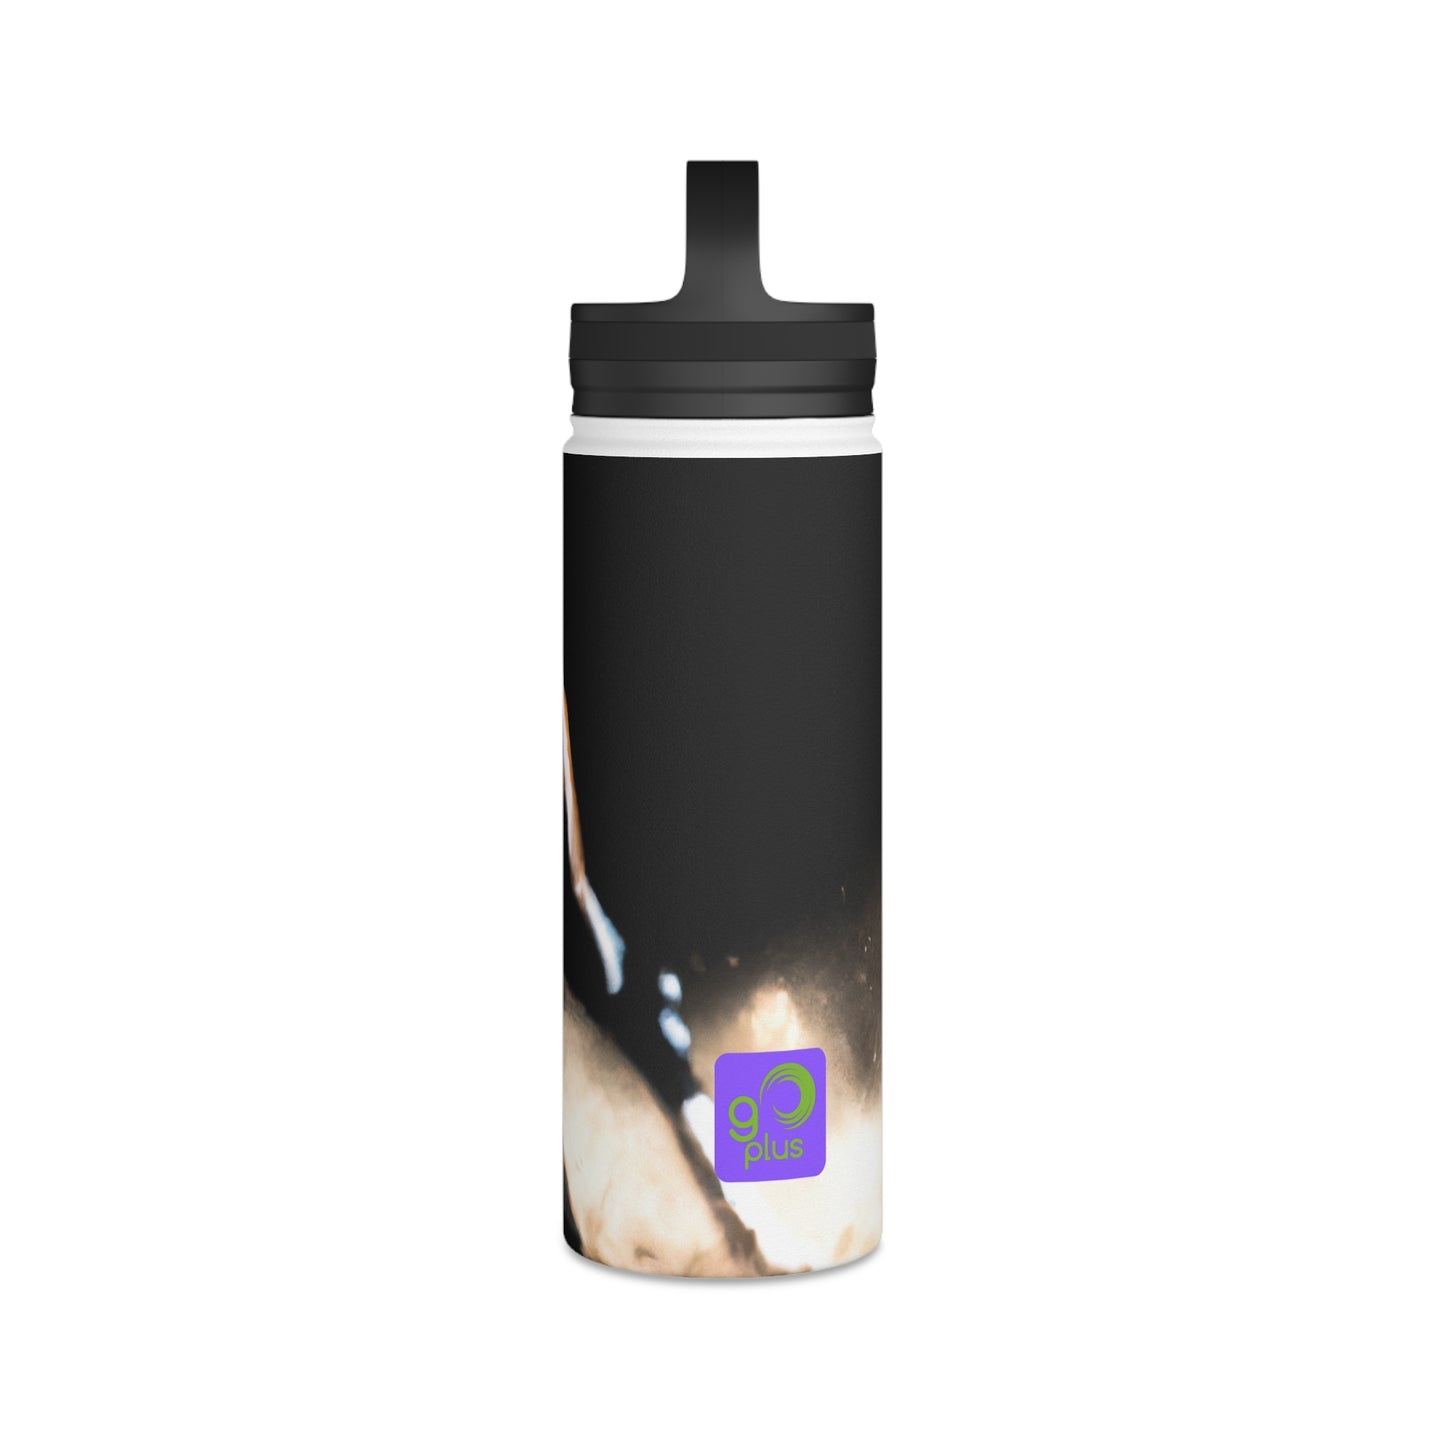 Dynamic Movements in Motion: Capturing the Energy of Sport Through Art - Go Plus Stainless Steel Water Bottle, Handle Lid